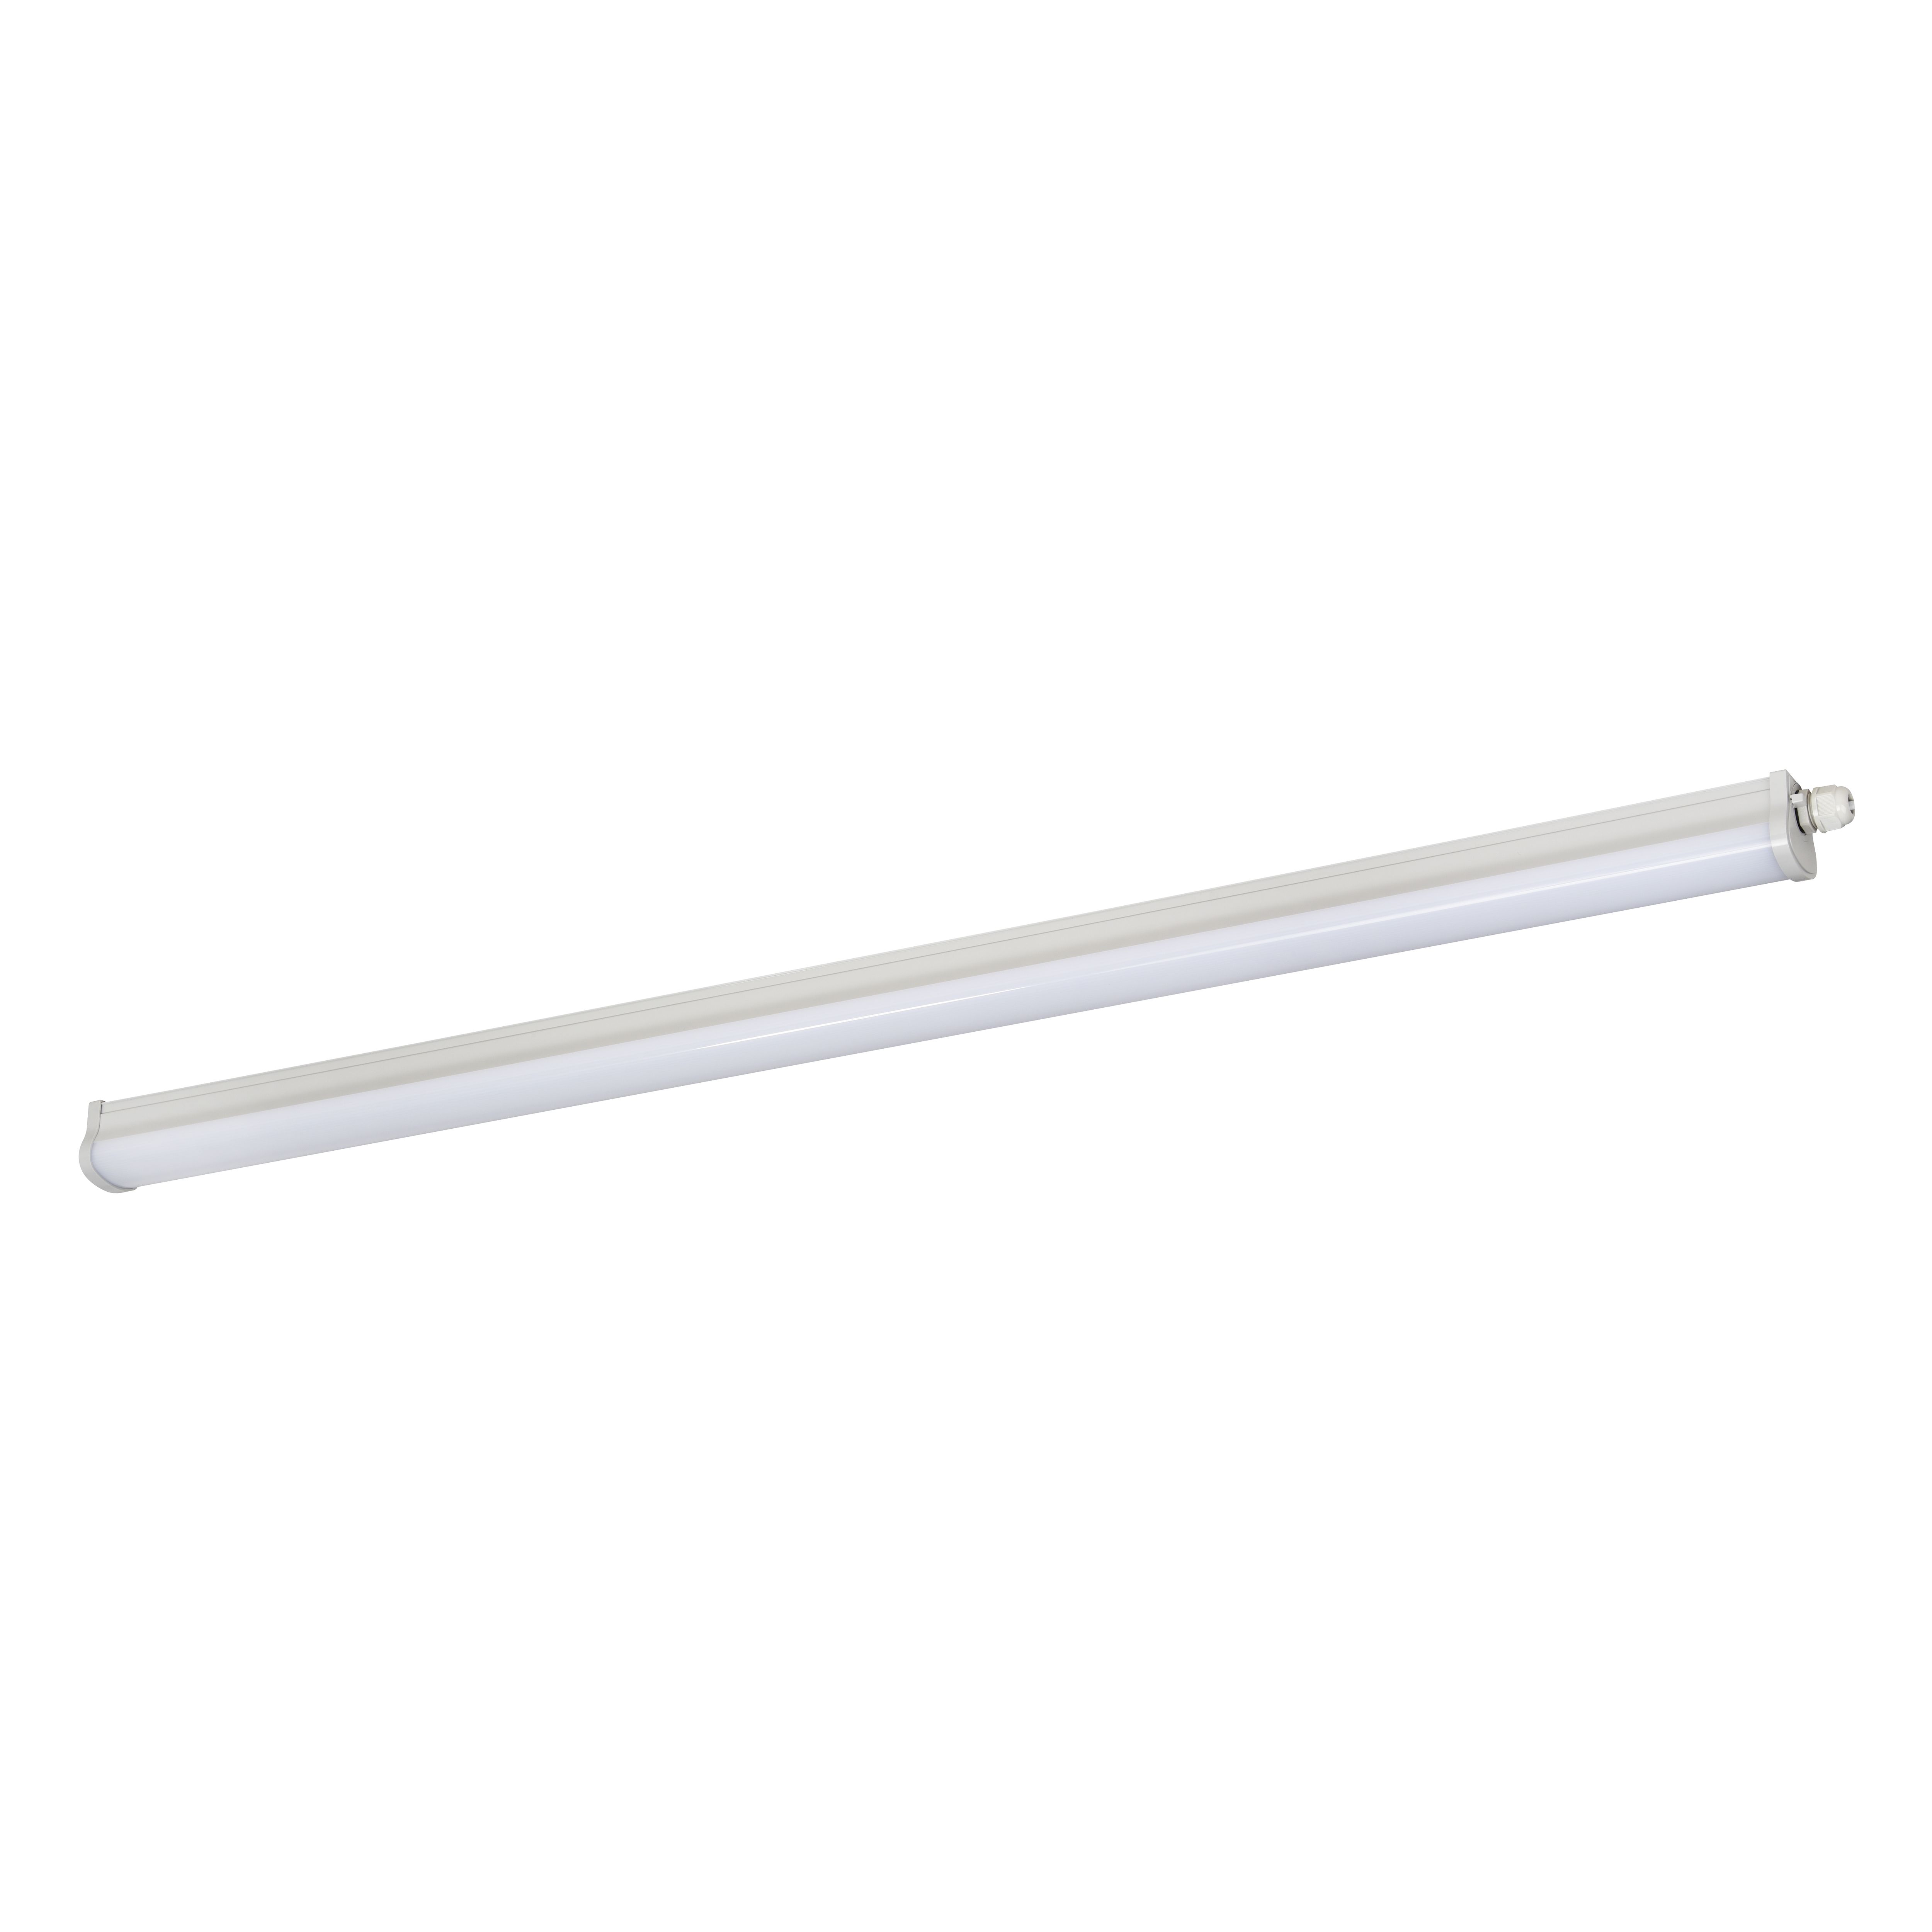 Afonso Neutral white Integrated LED Batten 39W 4400lm (L)1.13m